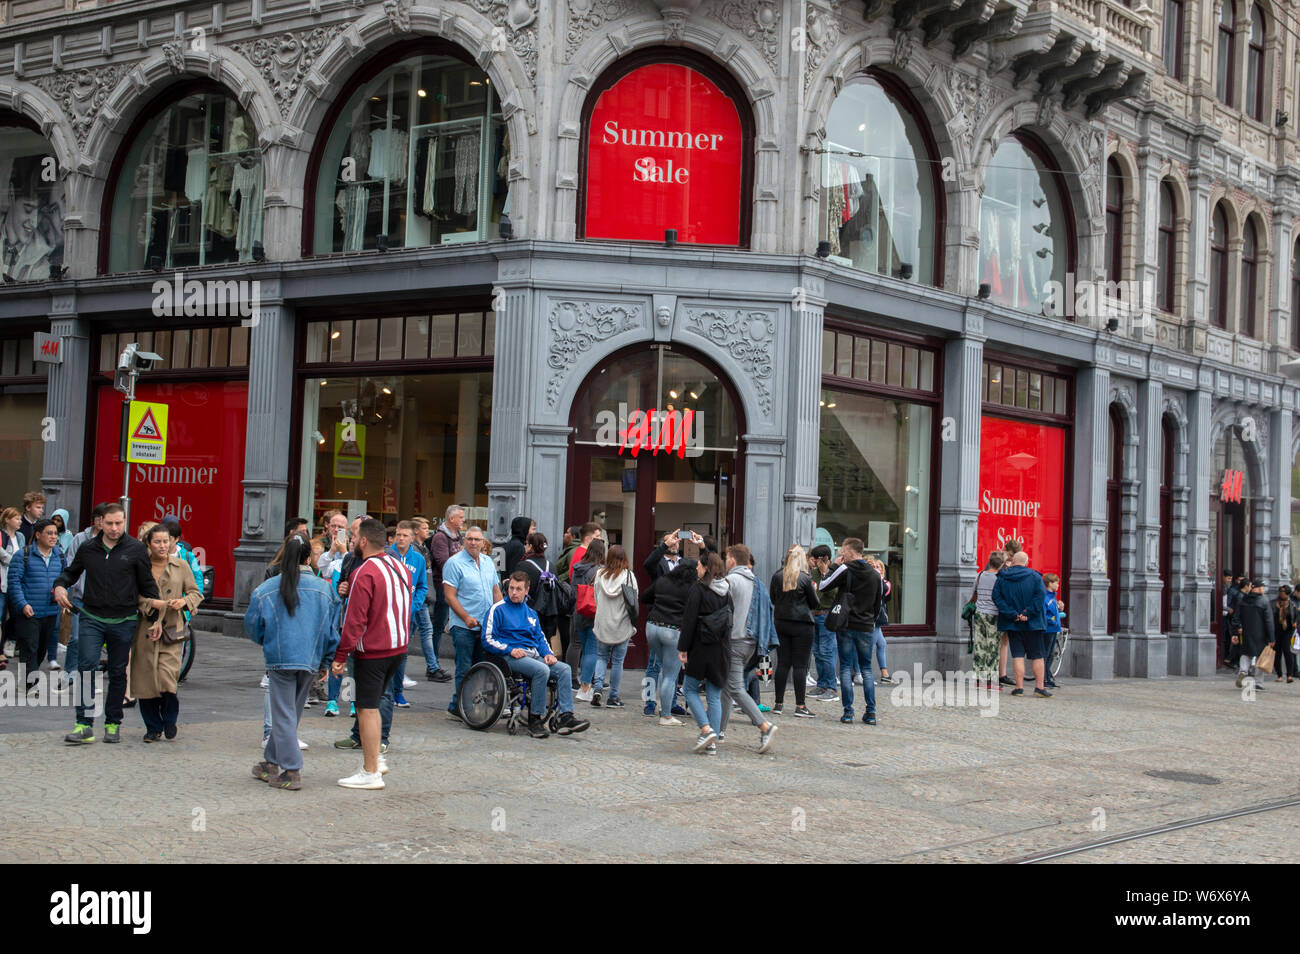 H&M Store At Amsterdam Centrum The Netherlands 2019 Stock Photo - Alamy